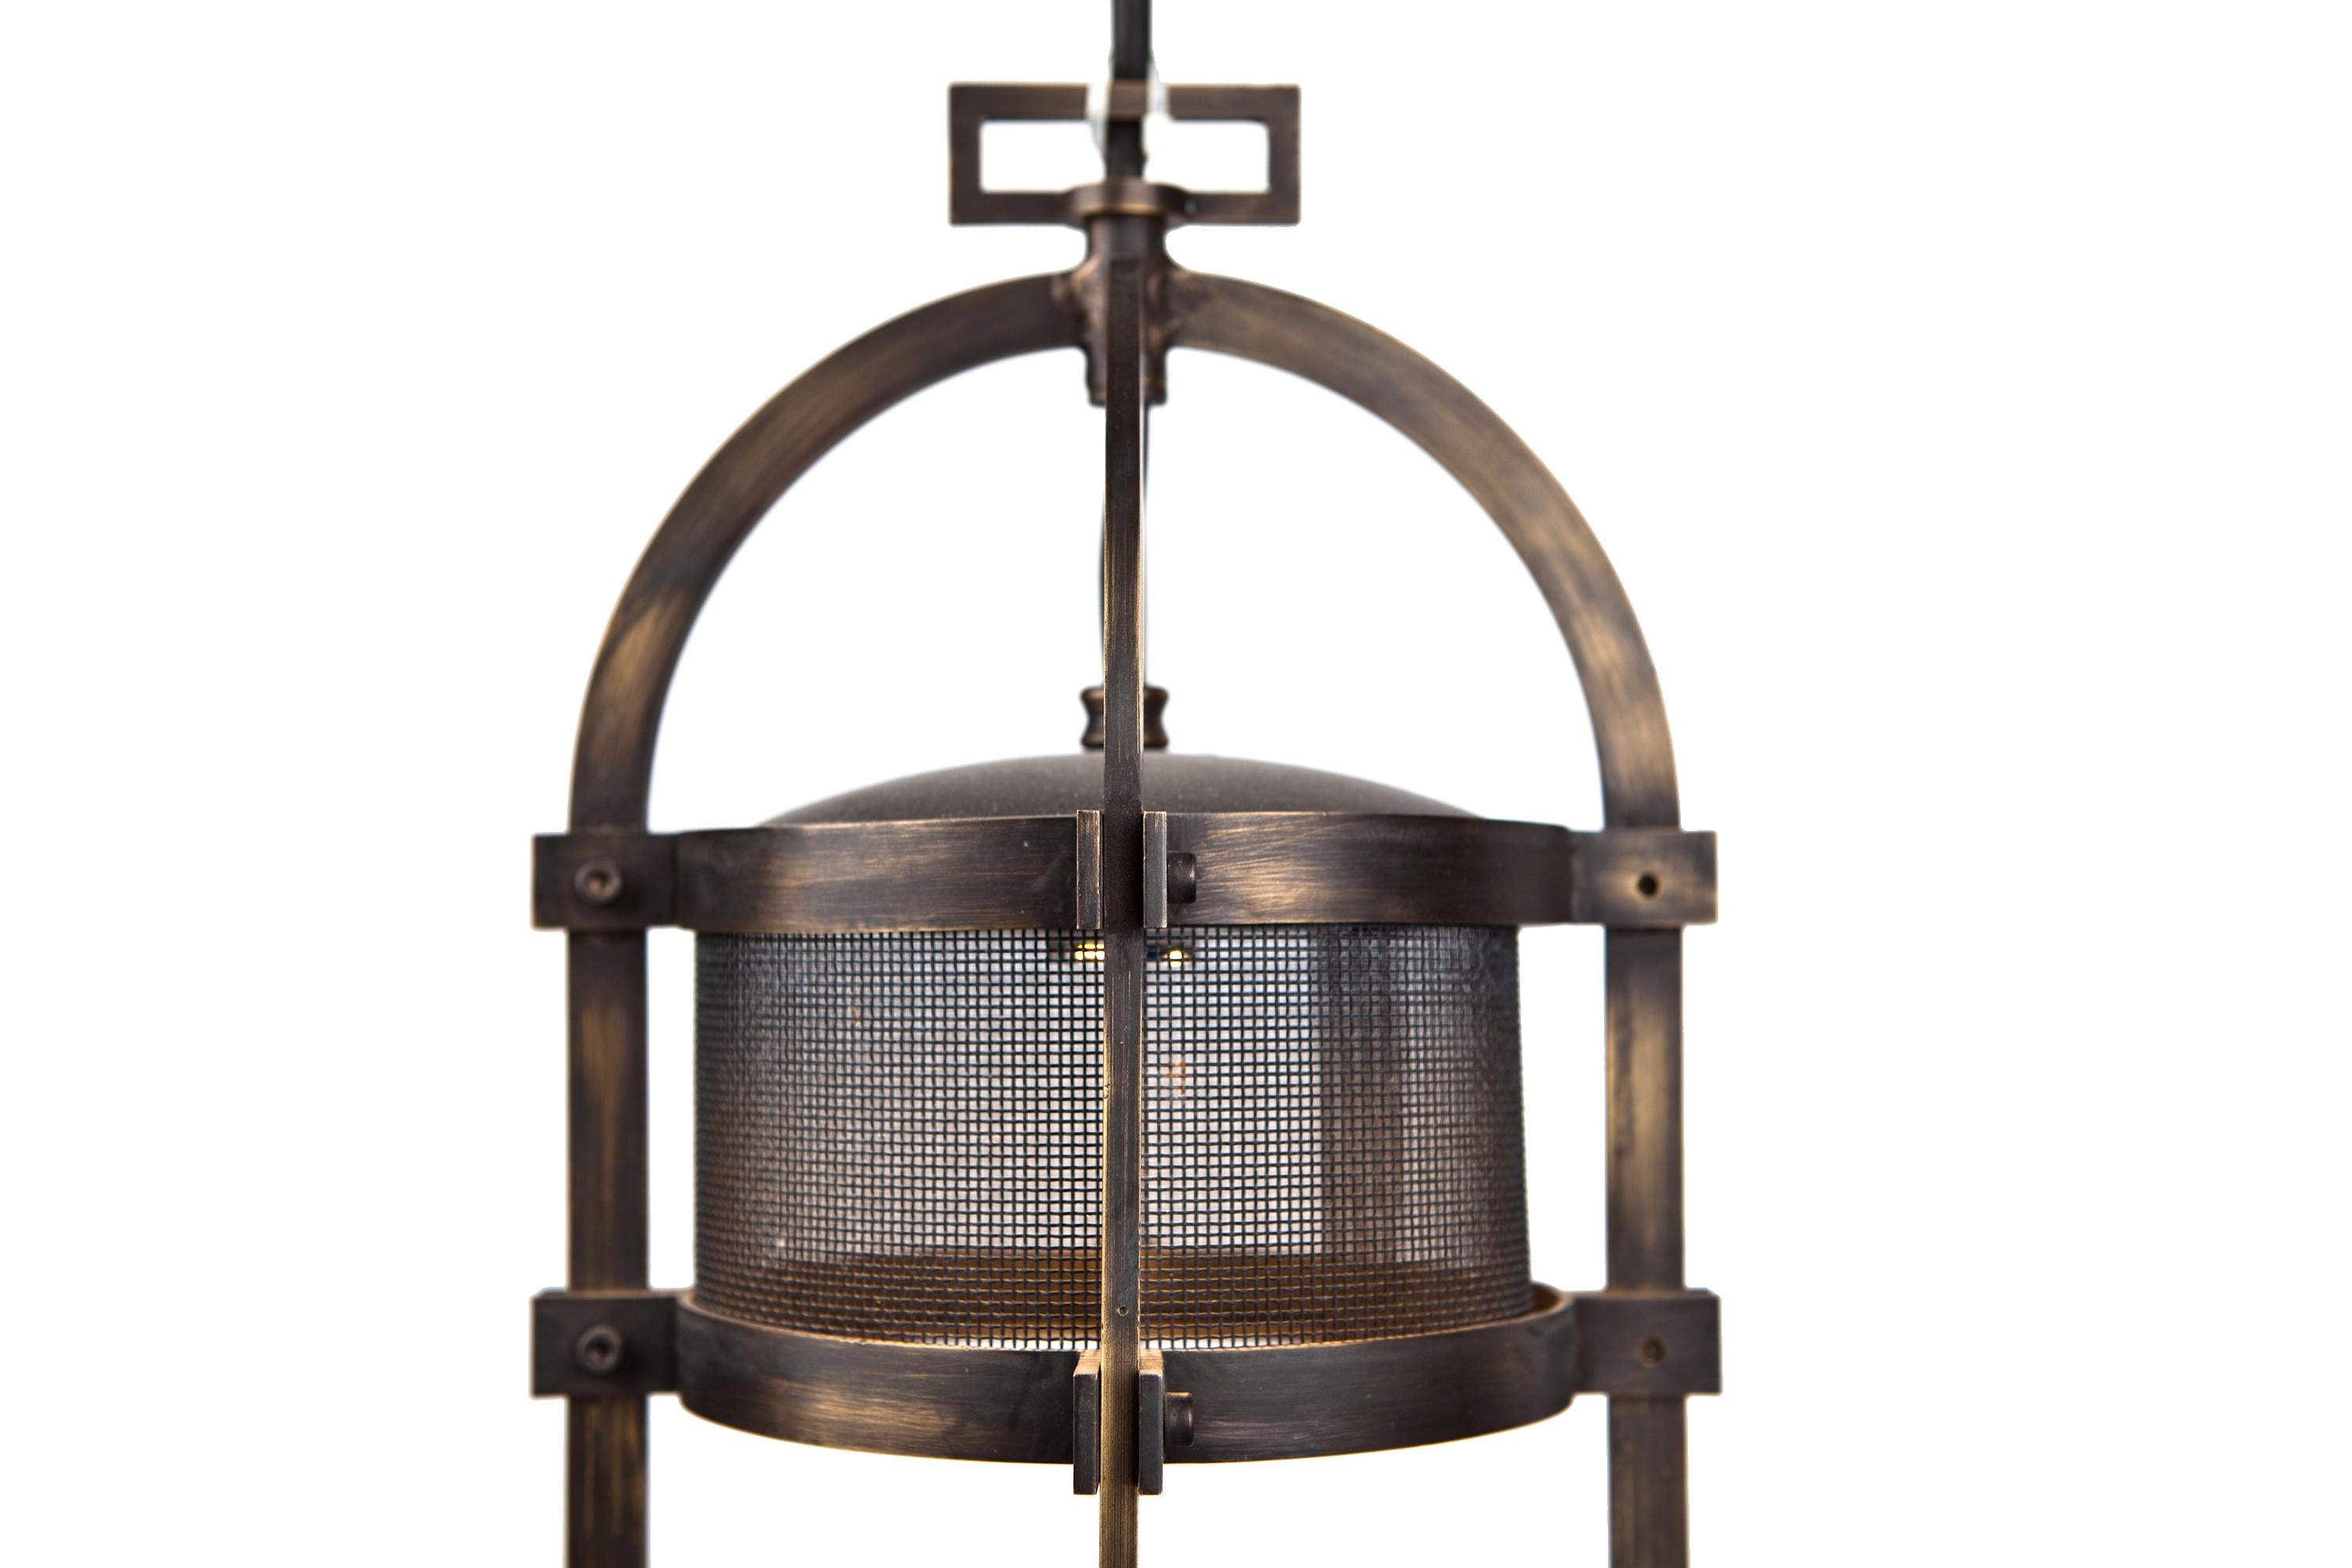 A pendant made of blackened brass with grid around the led patine.